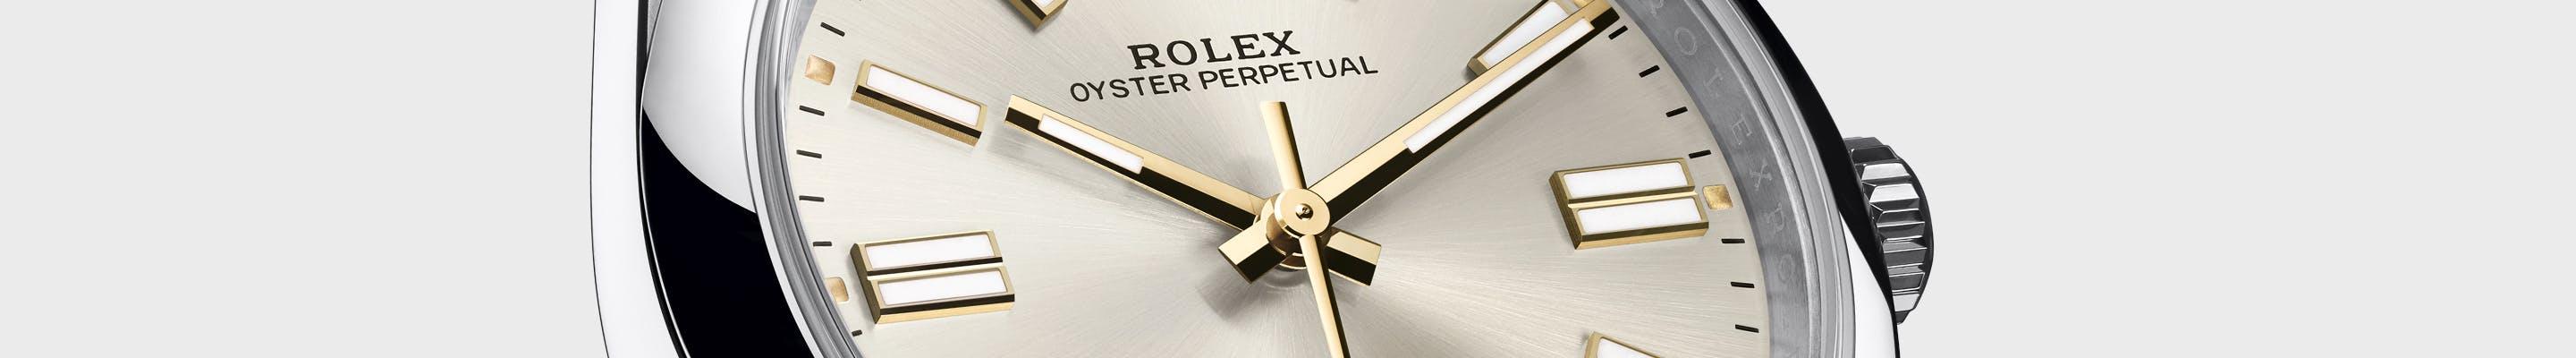 Rolex Oyster Perpetual with champagne dial